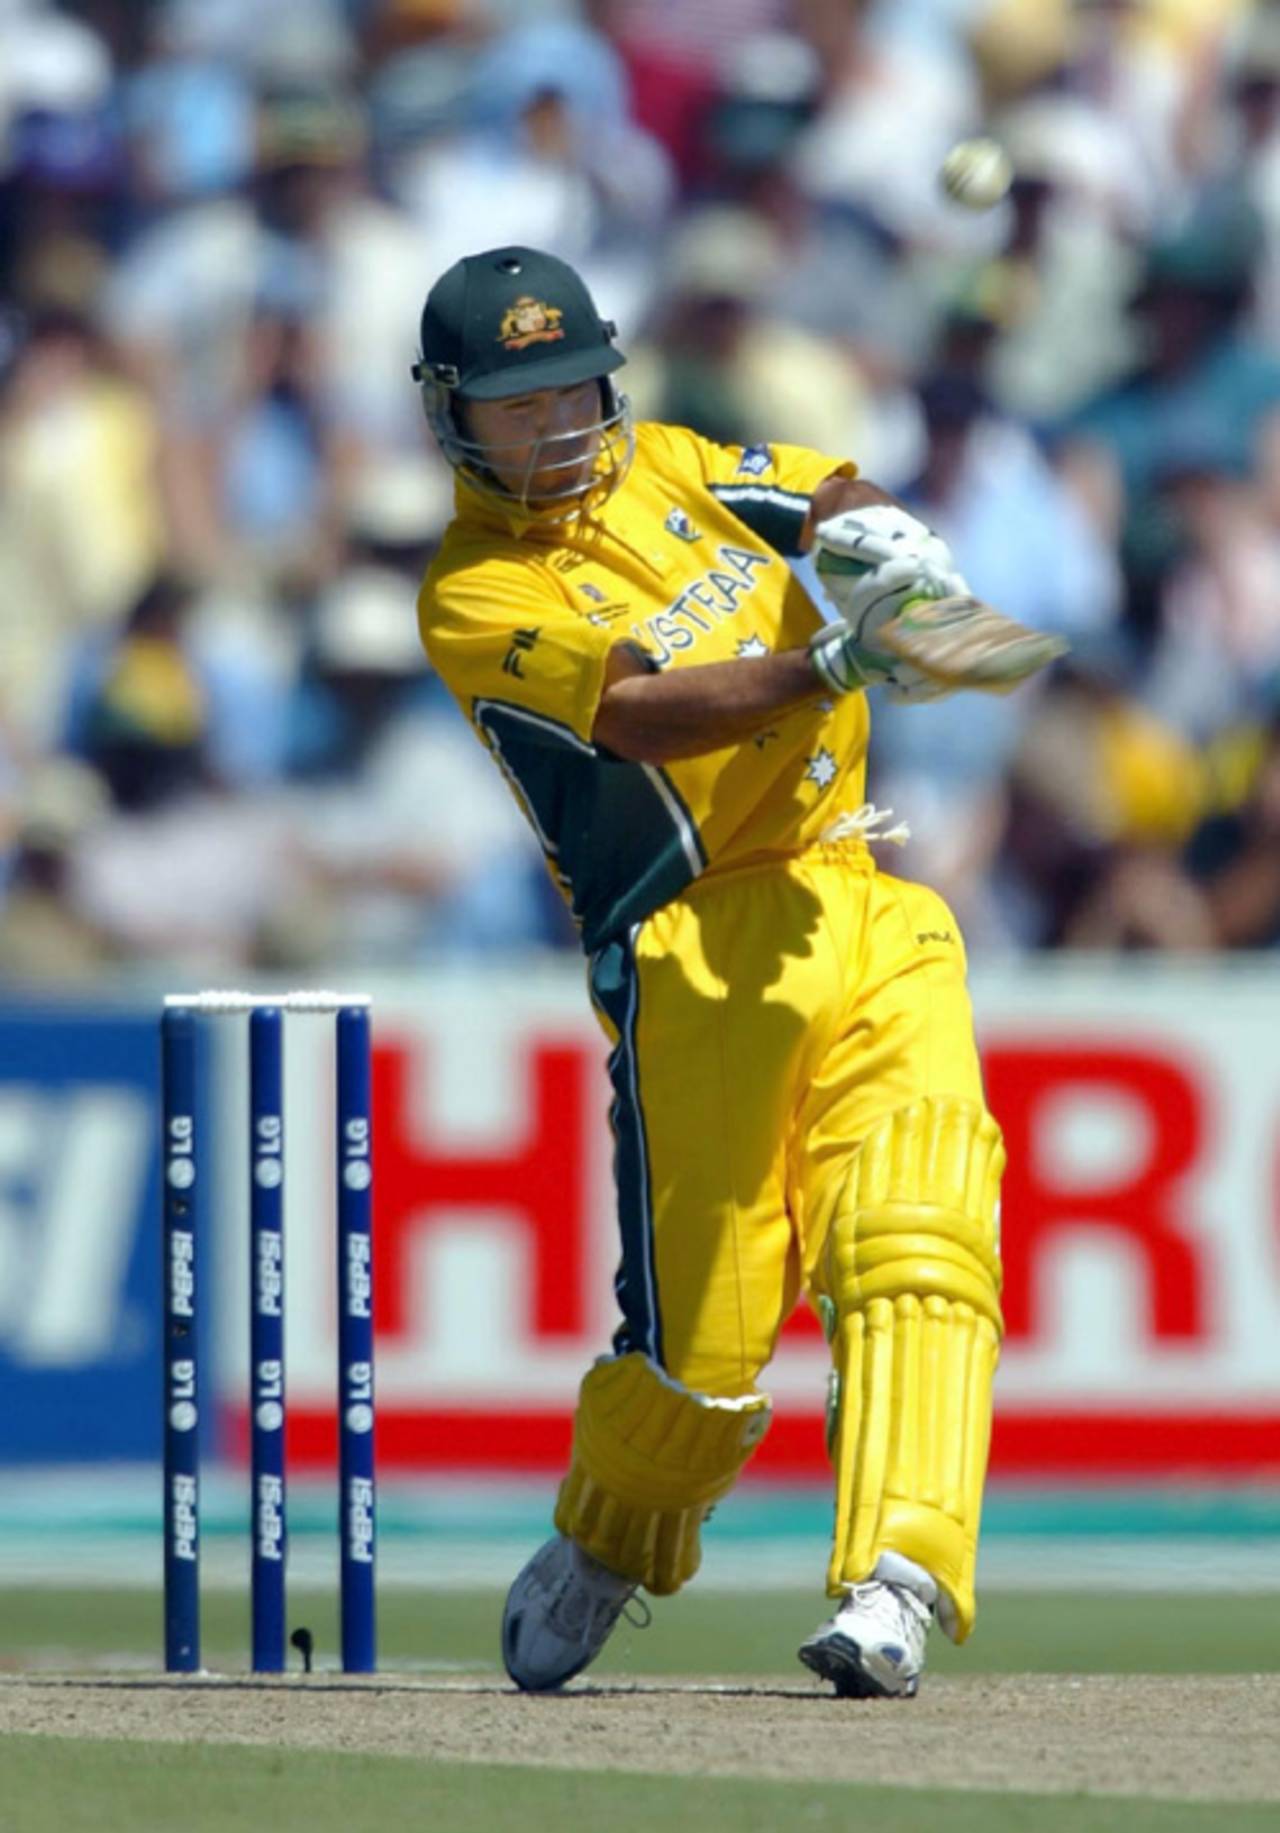 Ricky Ponting hits a straight six off Javagal Srinath, World Cup final, March 23, 2003